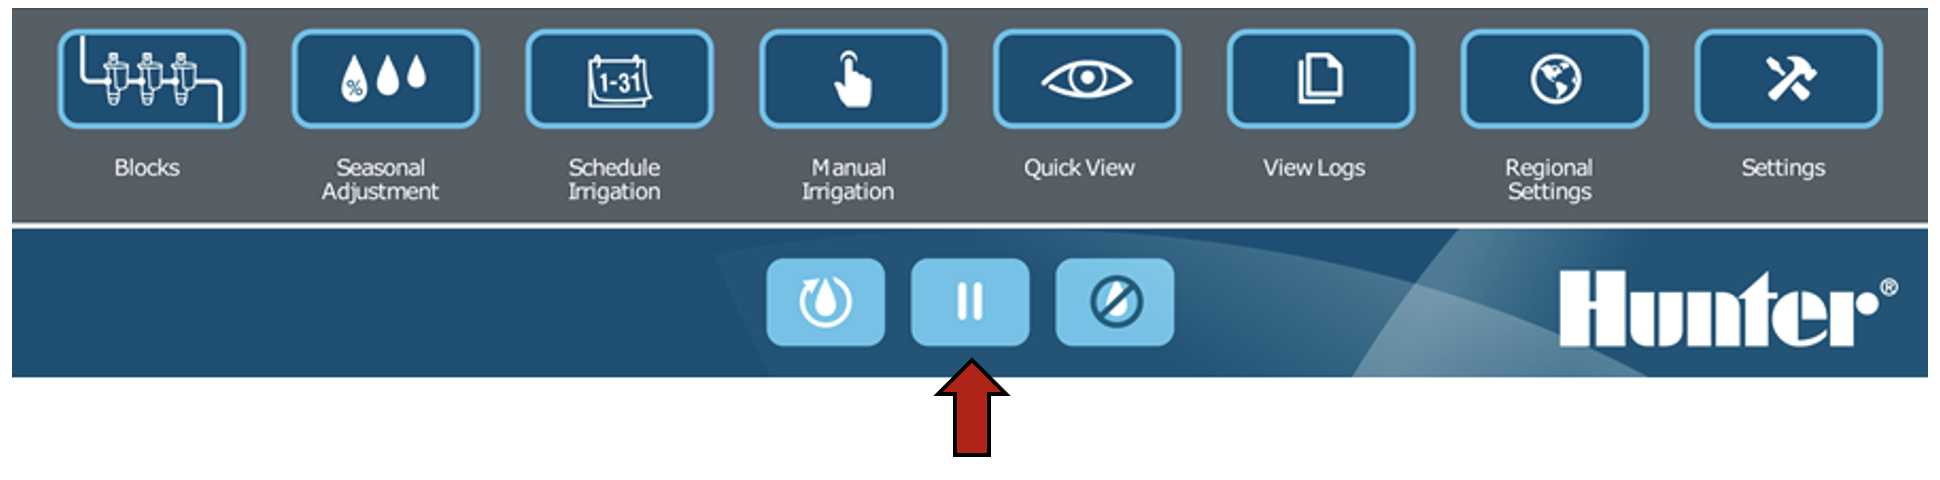 Image of the interface highlighting the pause button.